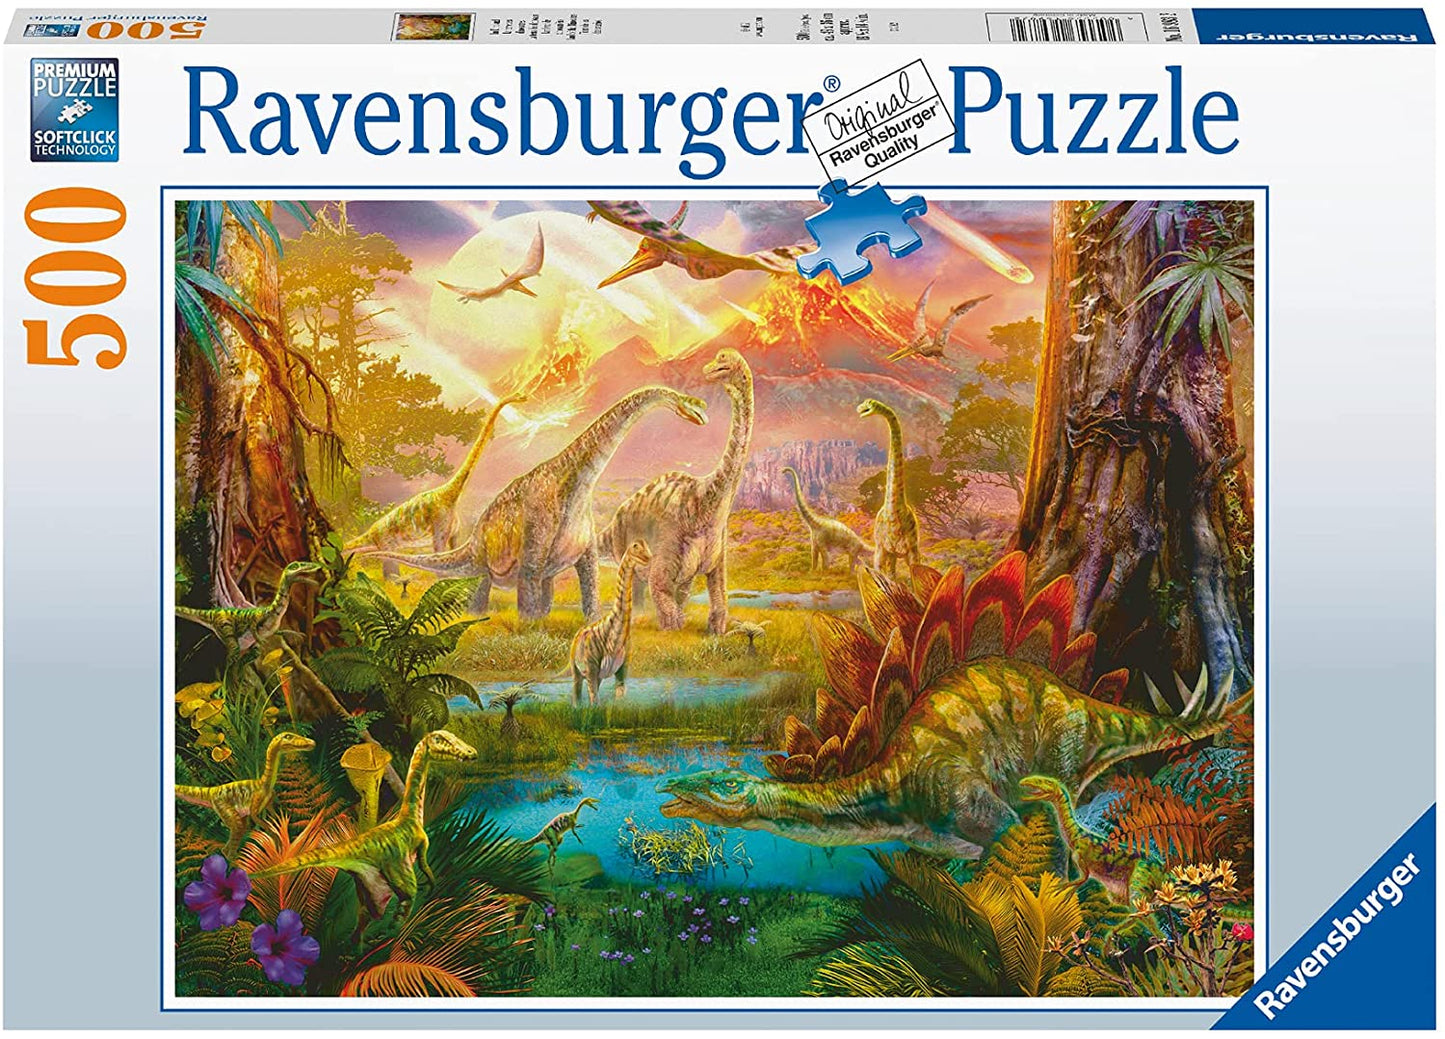 Ravensburger - Land of the Dinosaurs - 500 Piece Jigsaw Puzzle